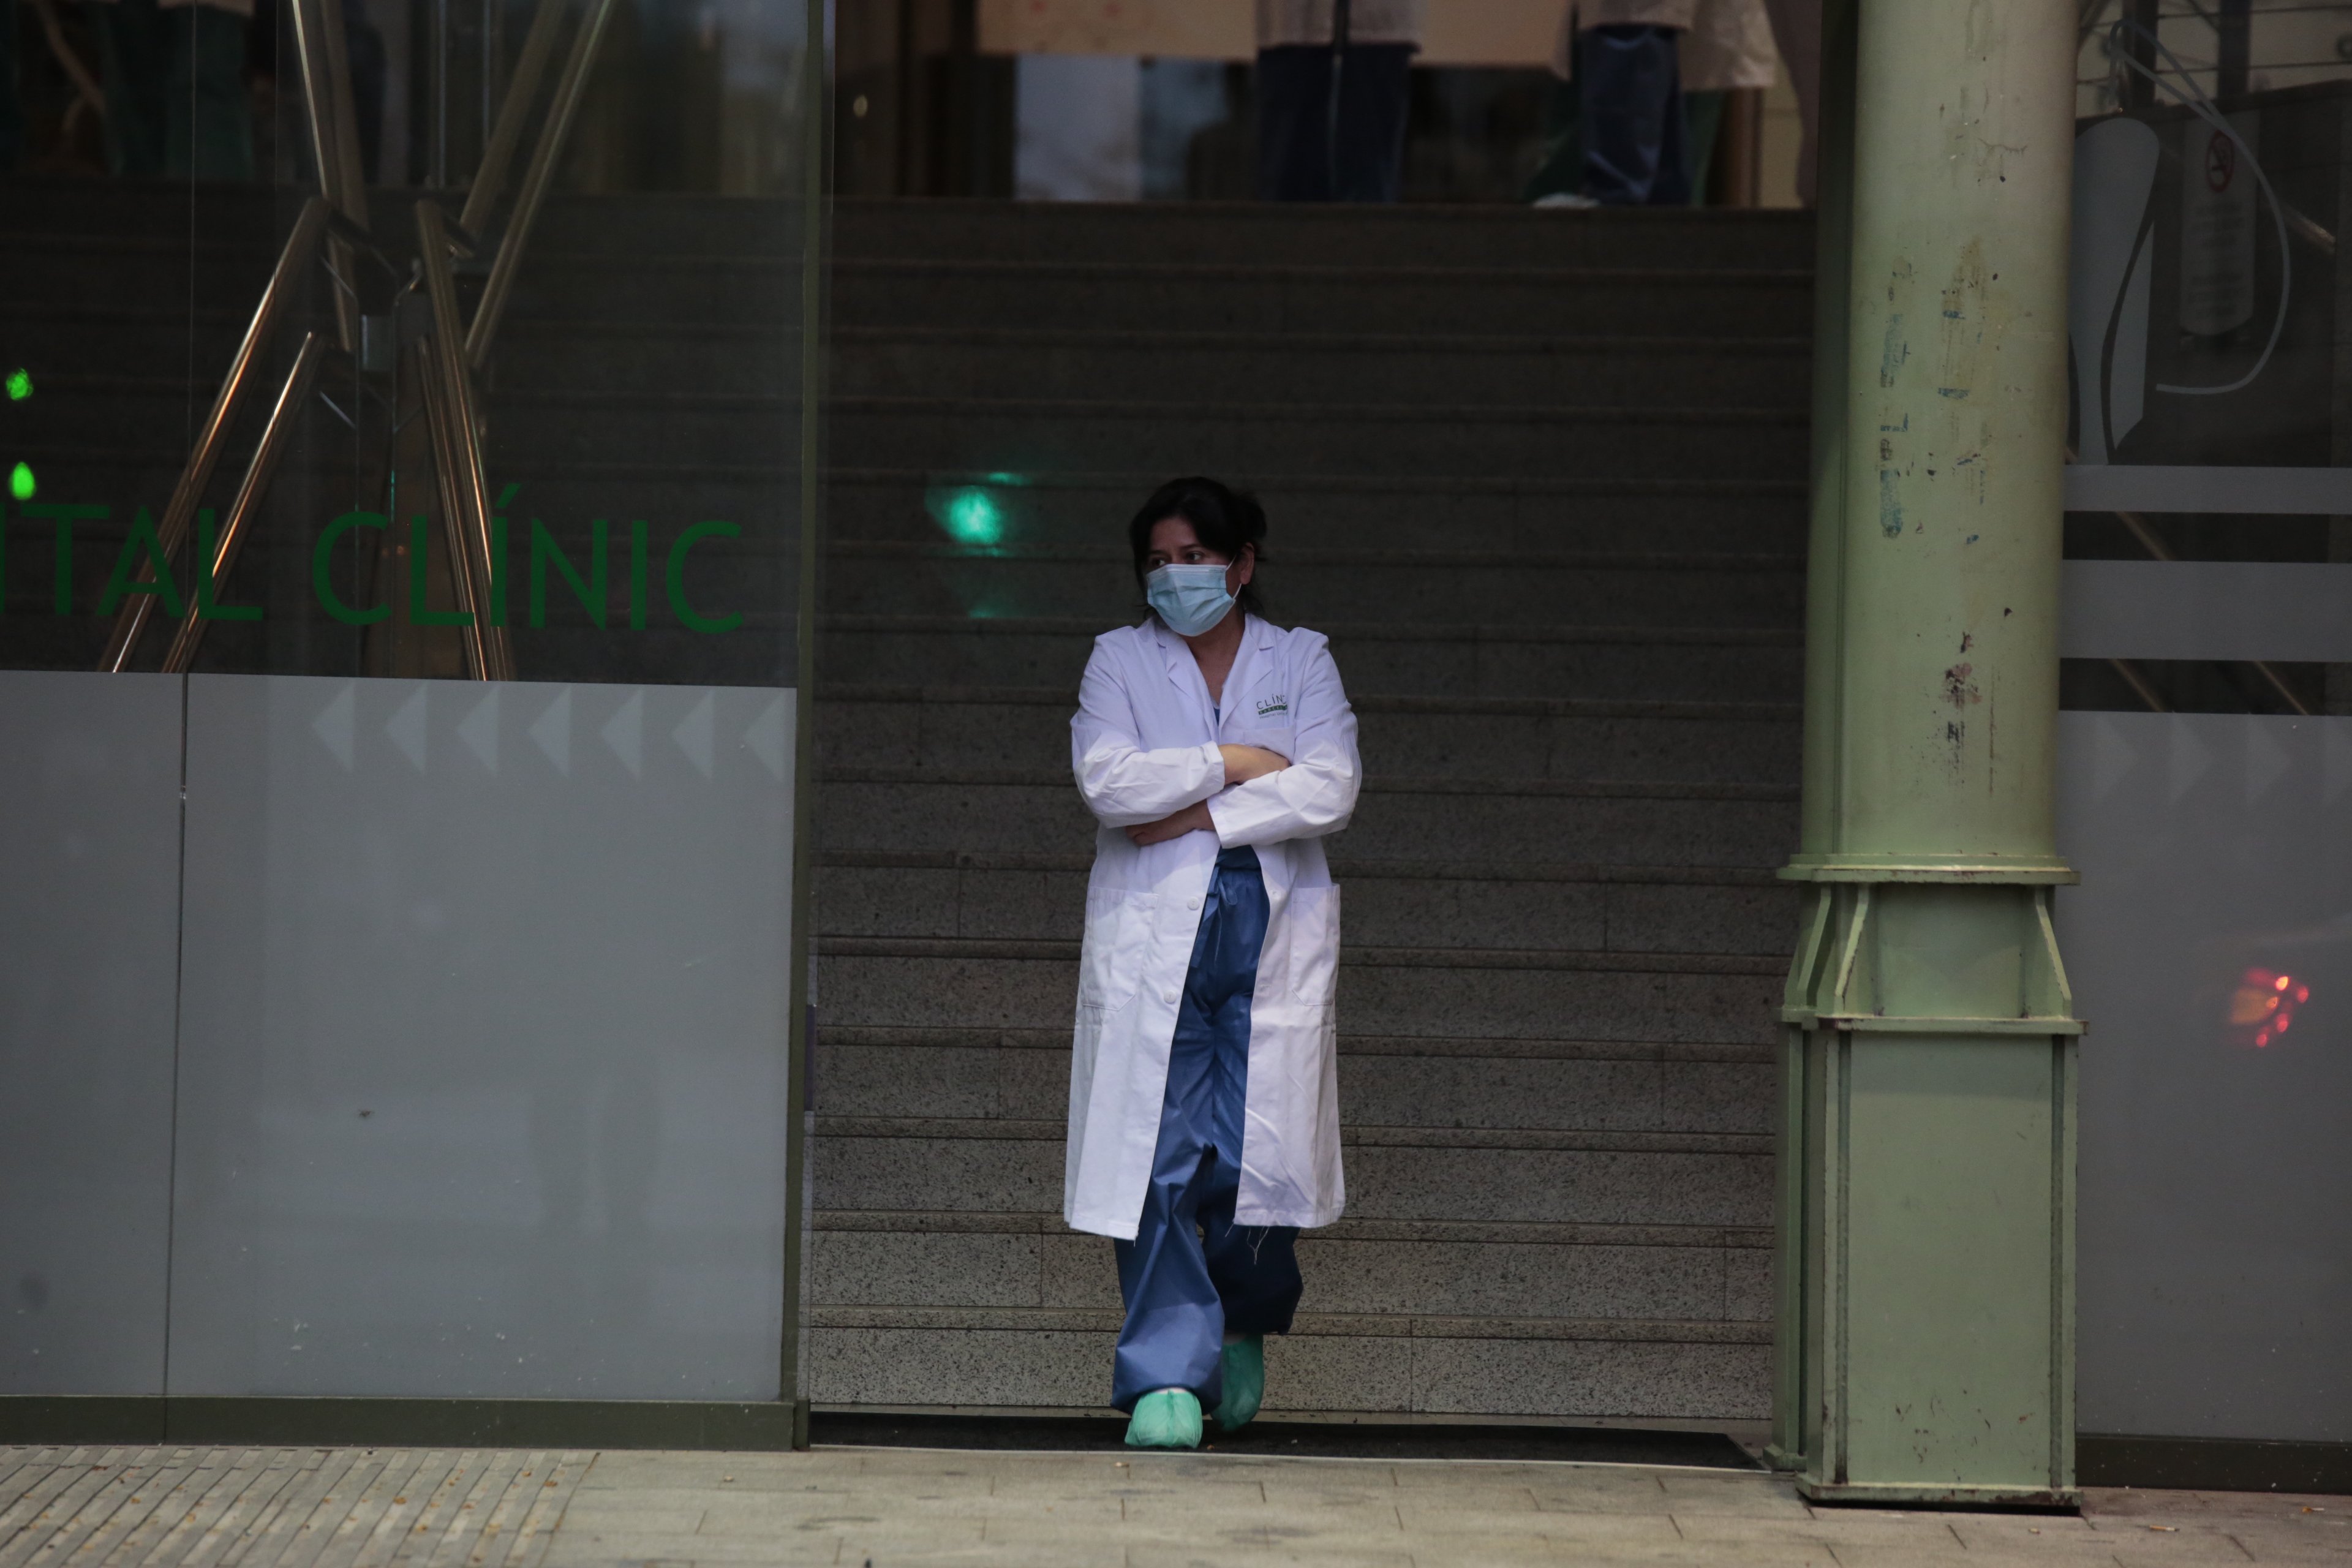 Face masks are now compulsory again in Catalonia's health centres